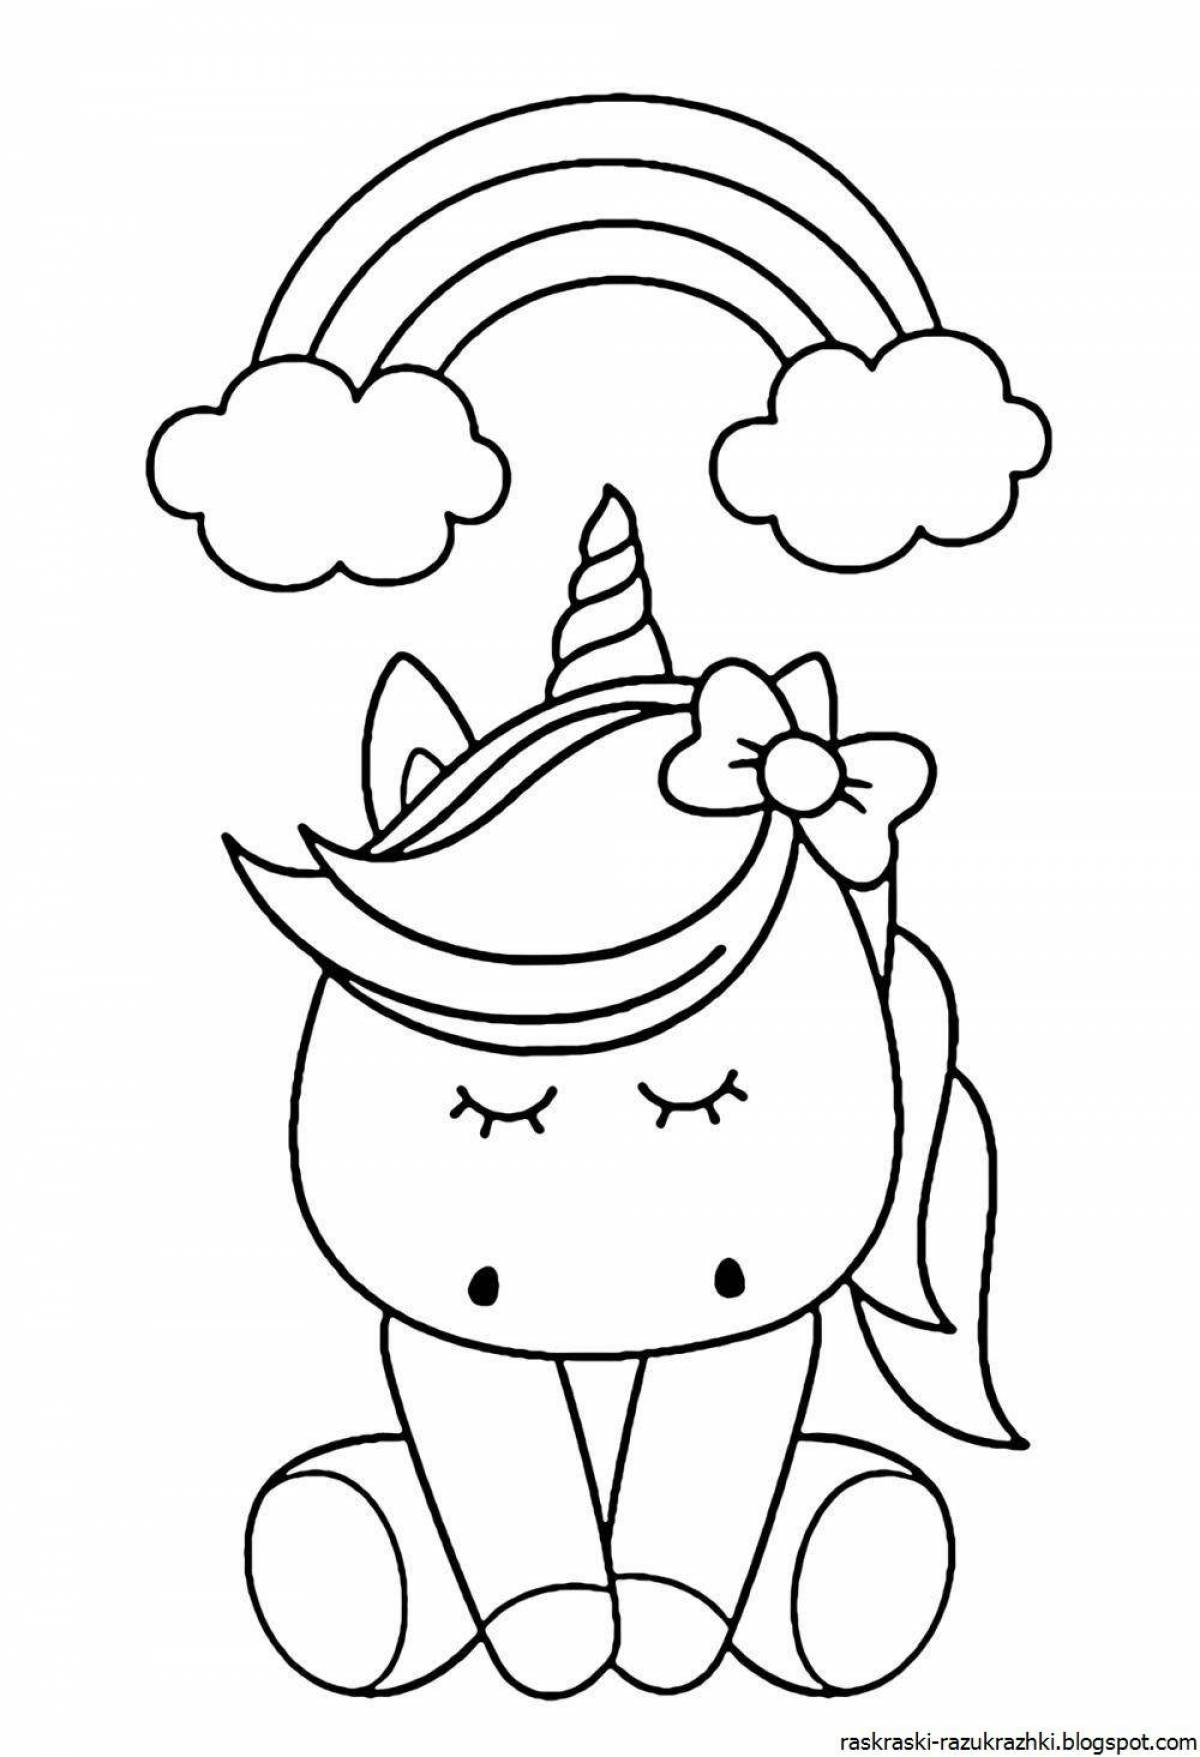 Exquisite unicorn coloring book for girls